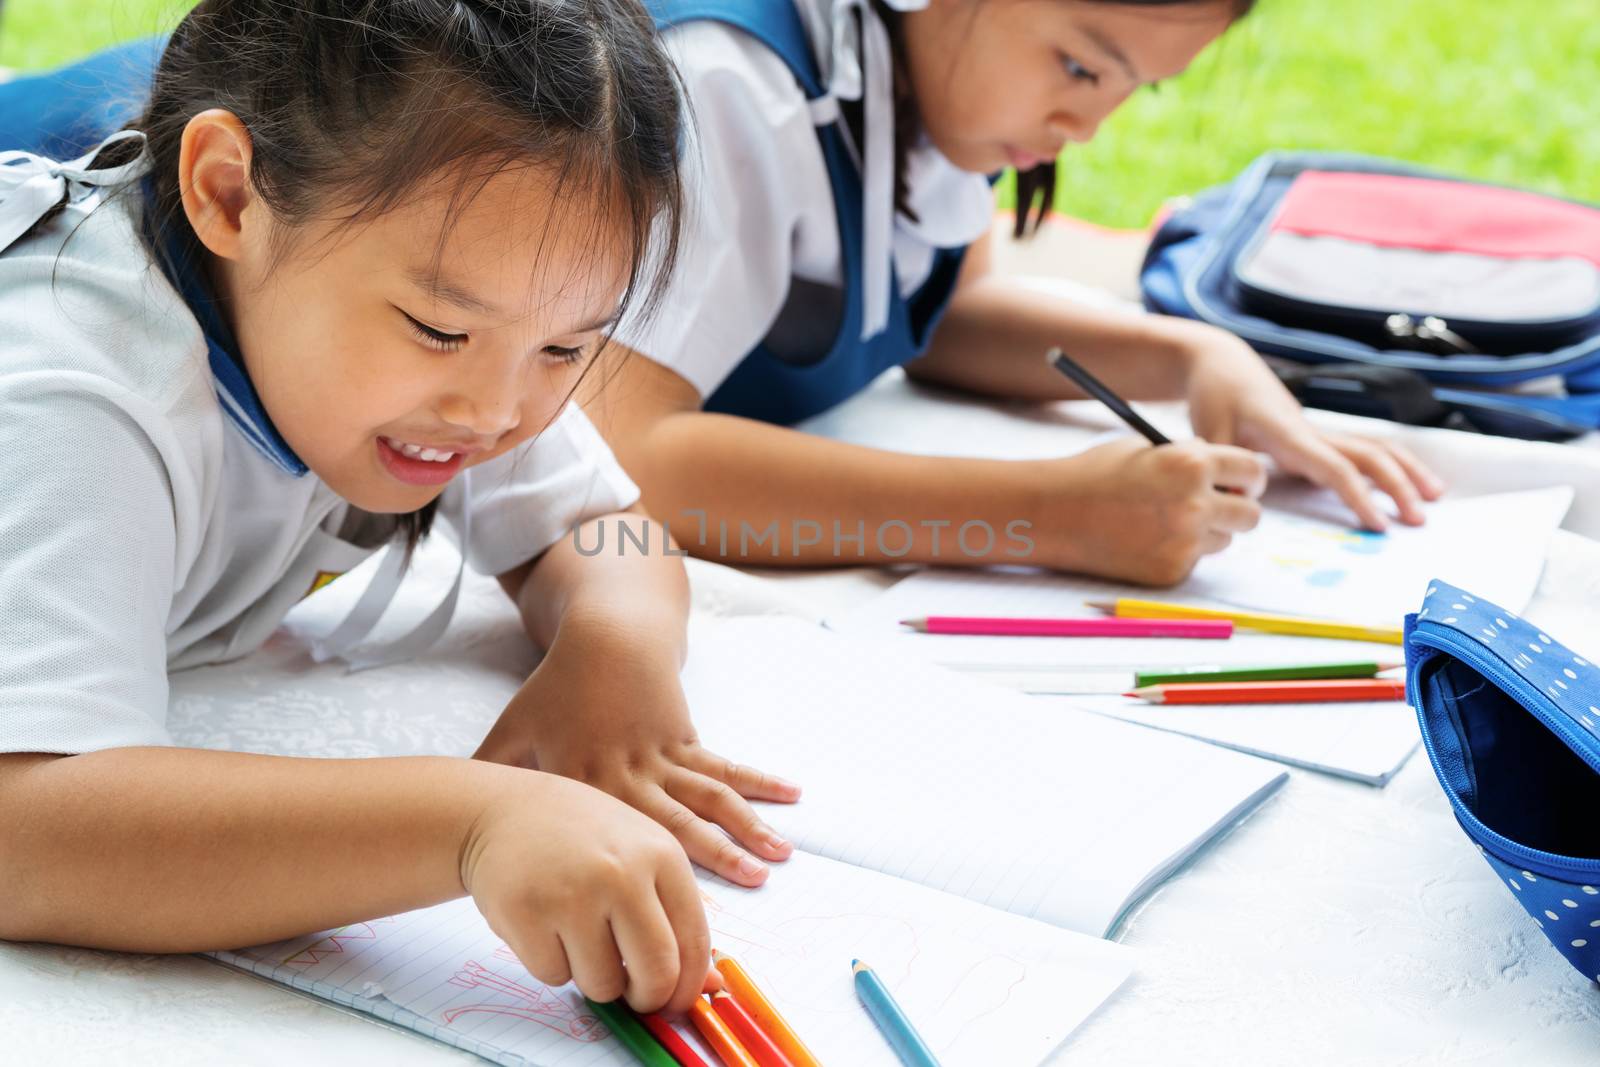 two sister girl writes to writing-books. The decision of lessons. girl lay down drawing the picture